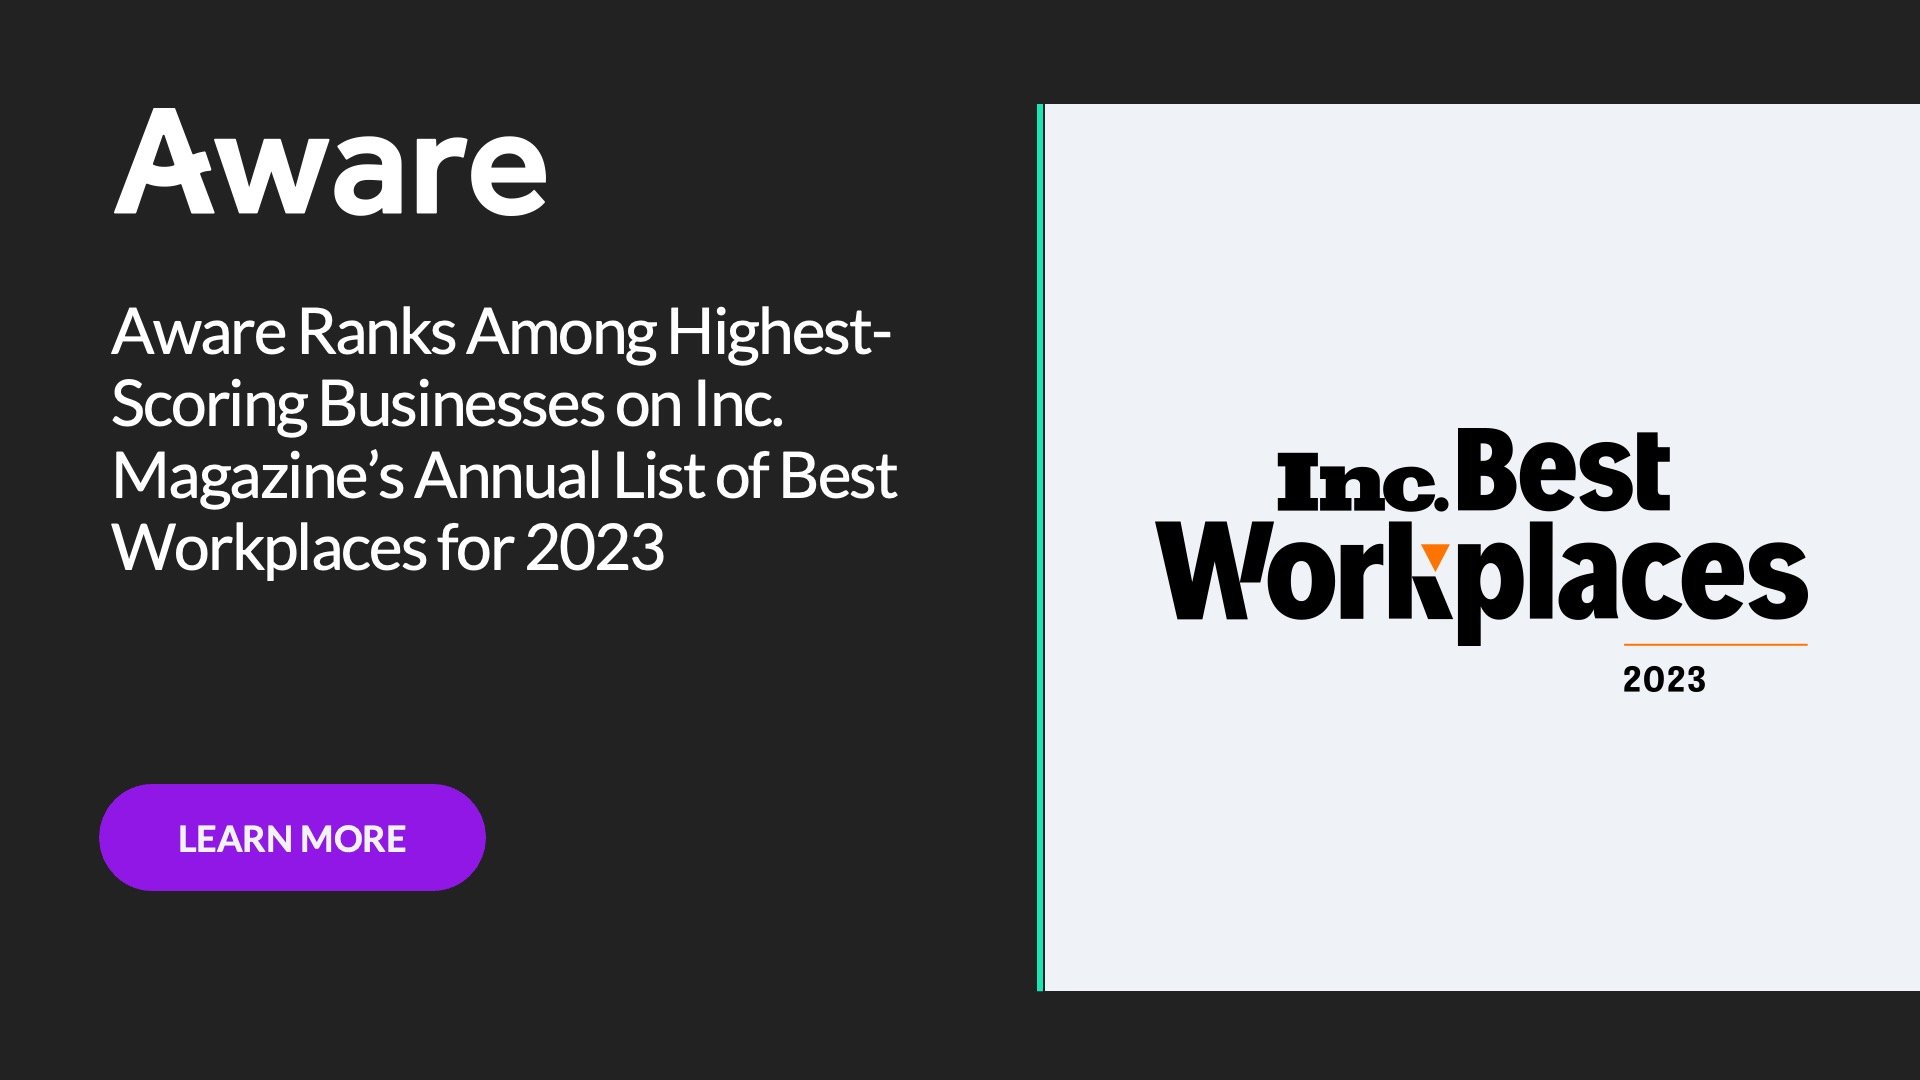 Aware Ranks Among Highest-Scoring Businesses on Inc. Magazine’s Annual List of Best Workplaces for 2023